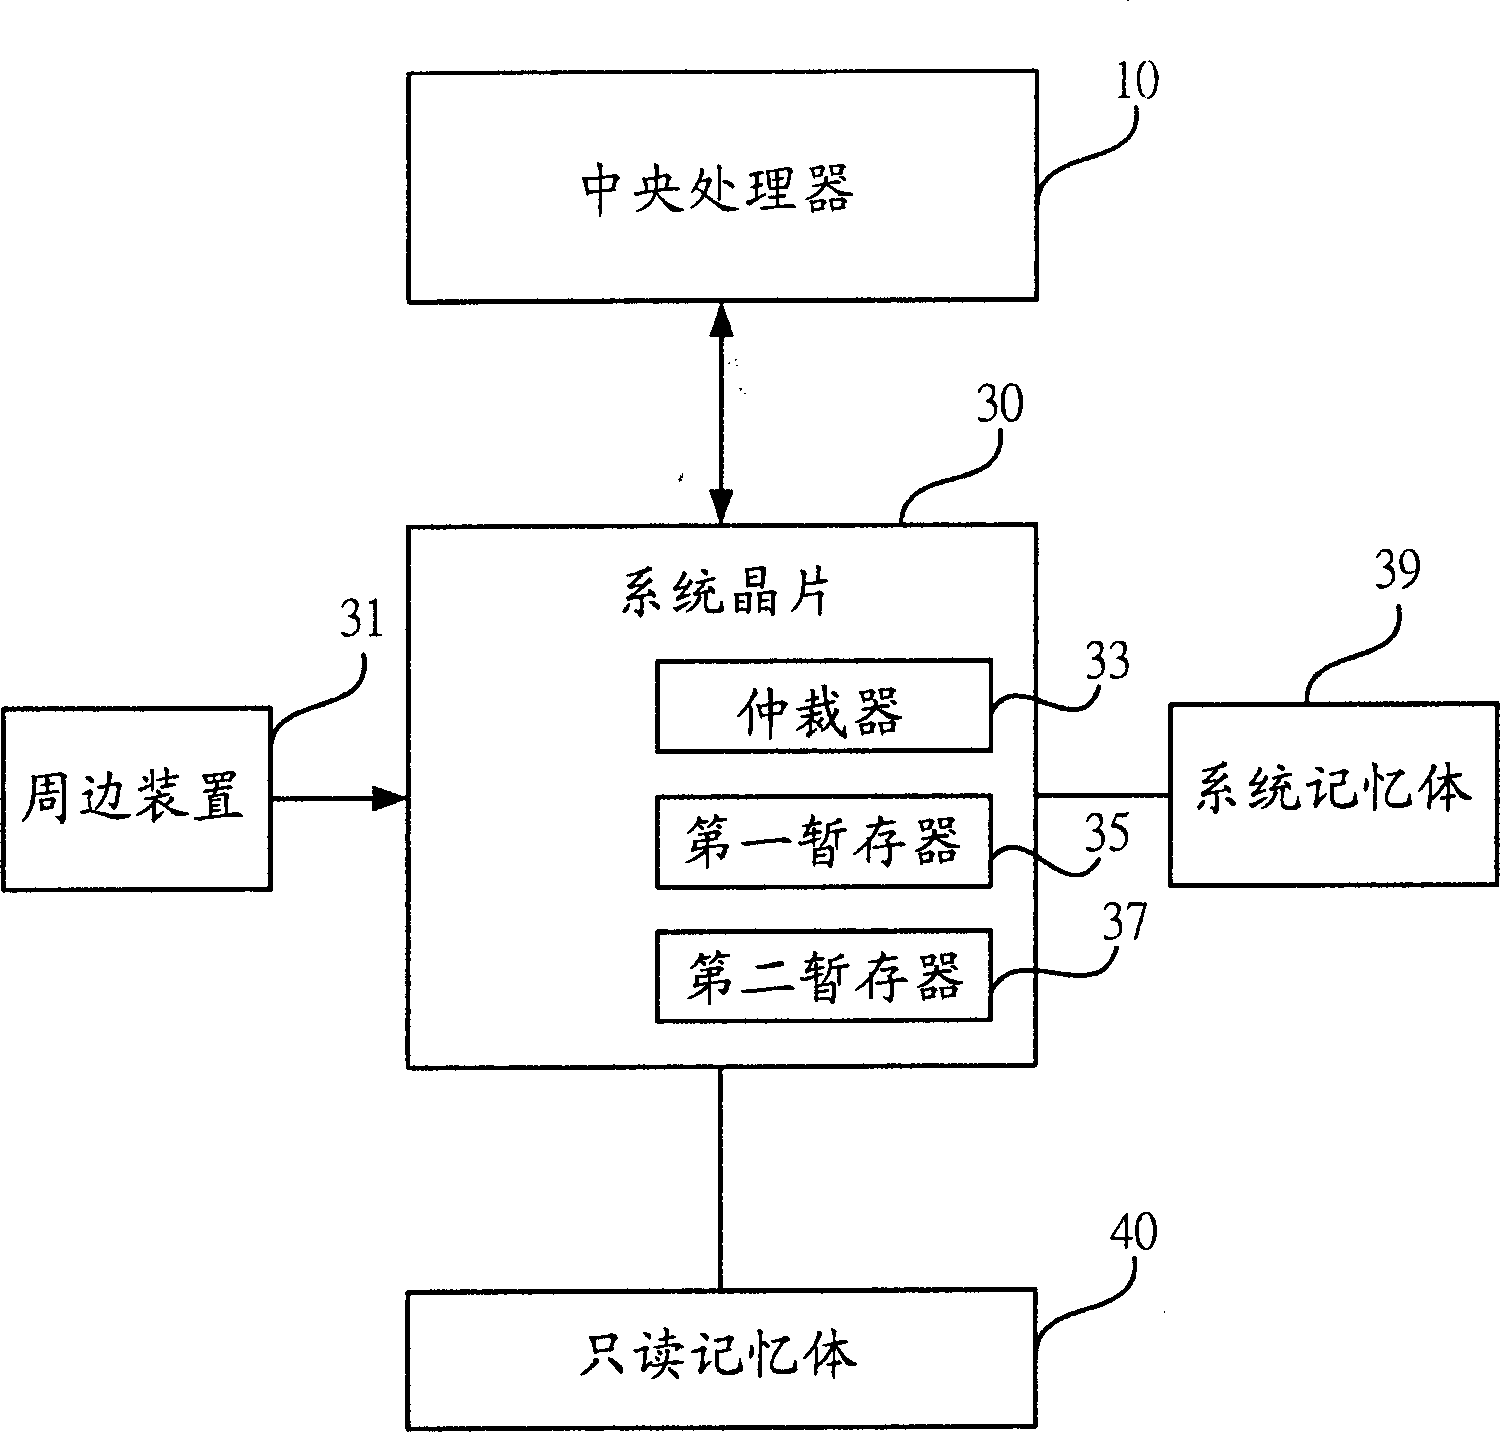 Power-supply saving method and system for central processing unit